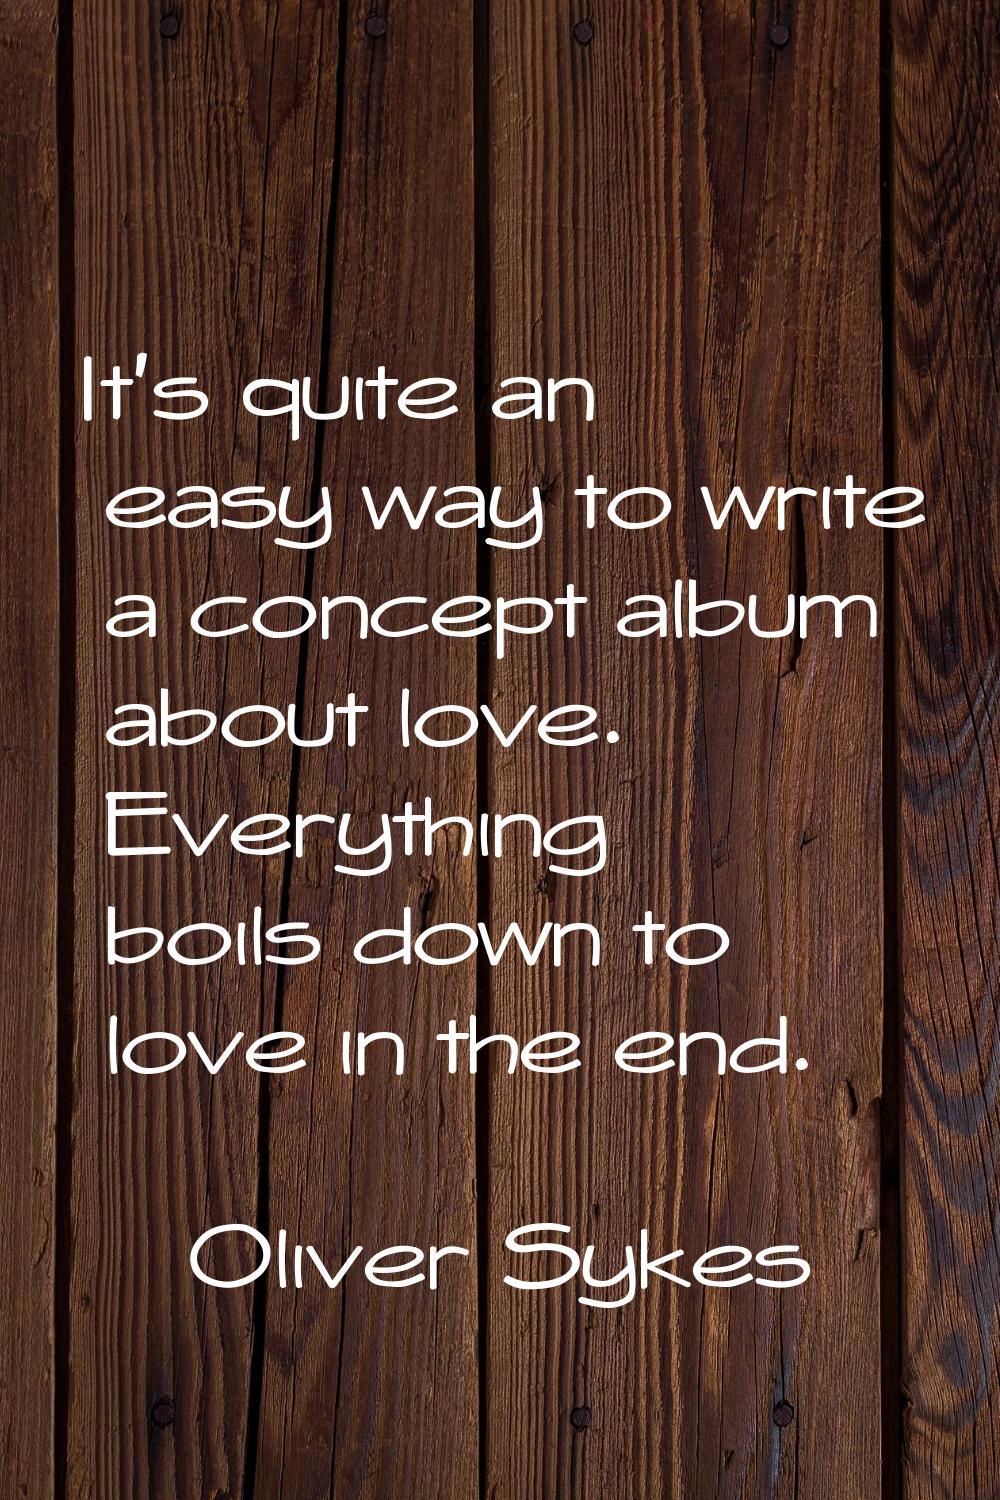 It's quite an easy way to write a concept album about love. Everything boils down to love in the en